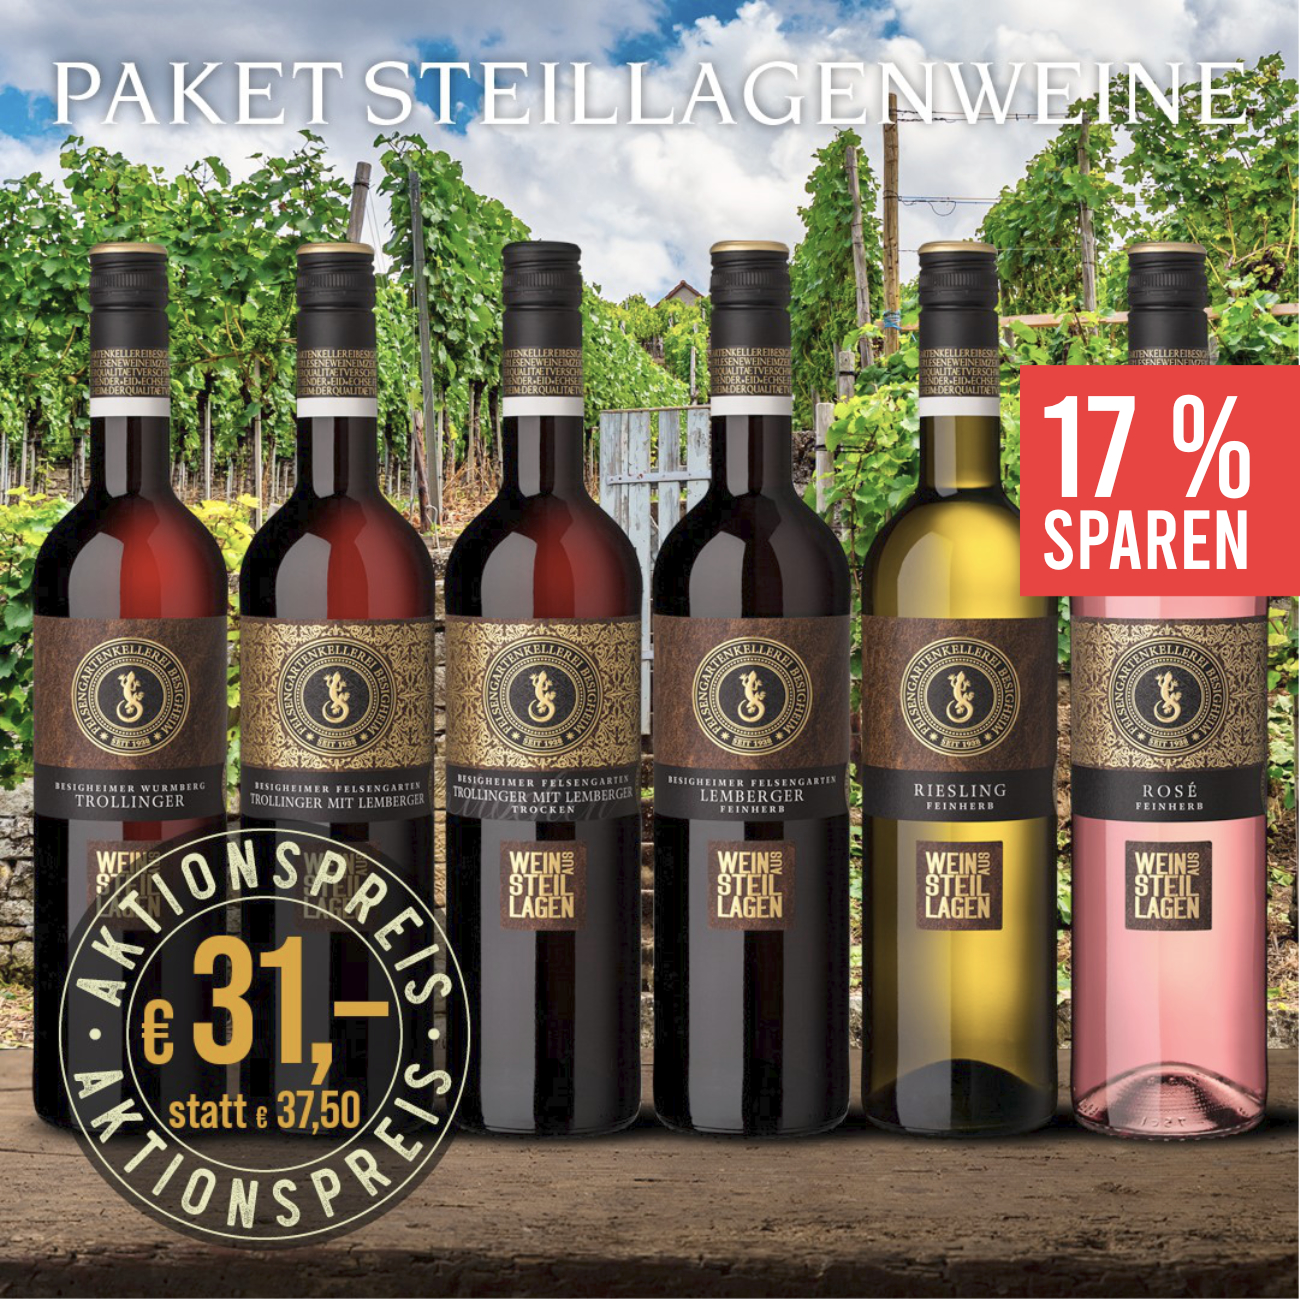 wines Find+Buy: of members wein.plus The wein.plus Find+Buy our |